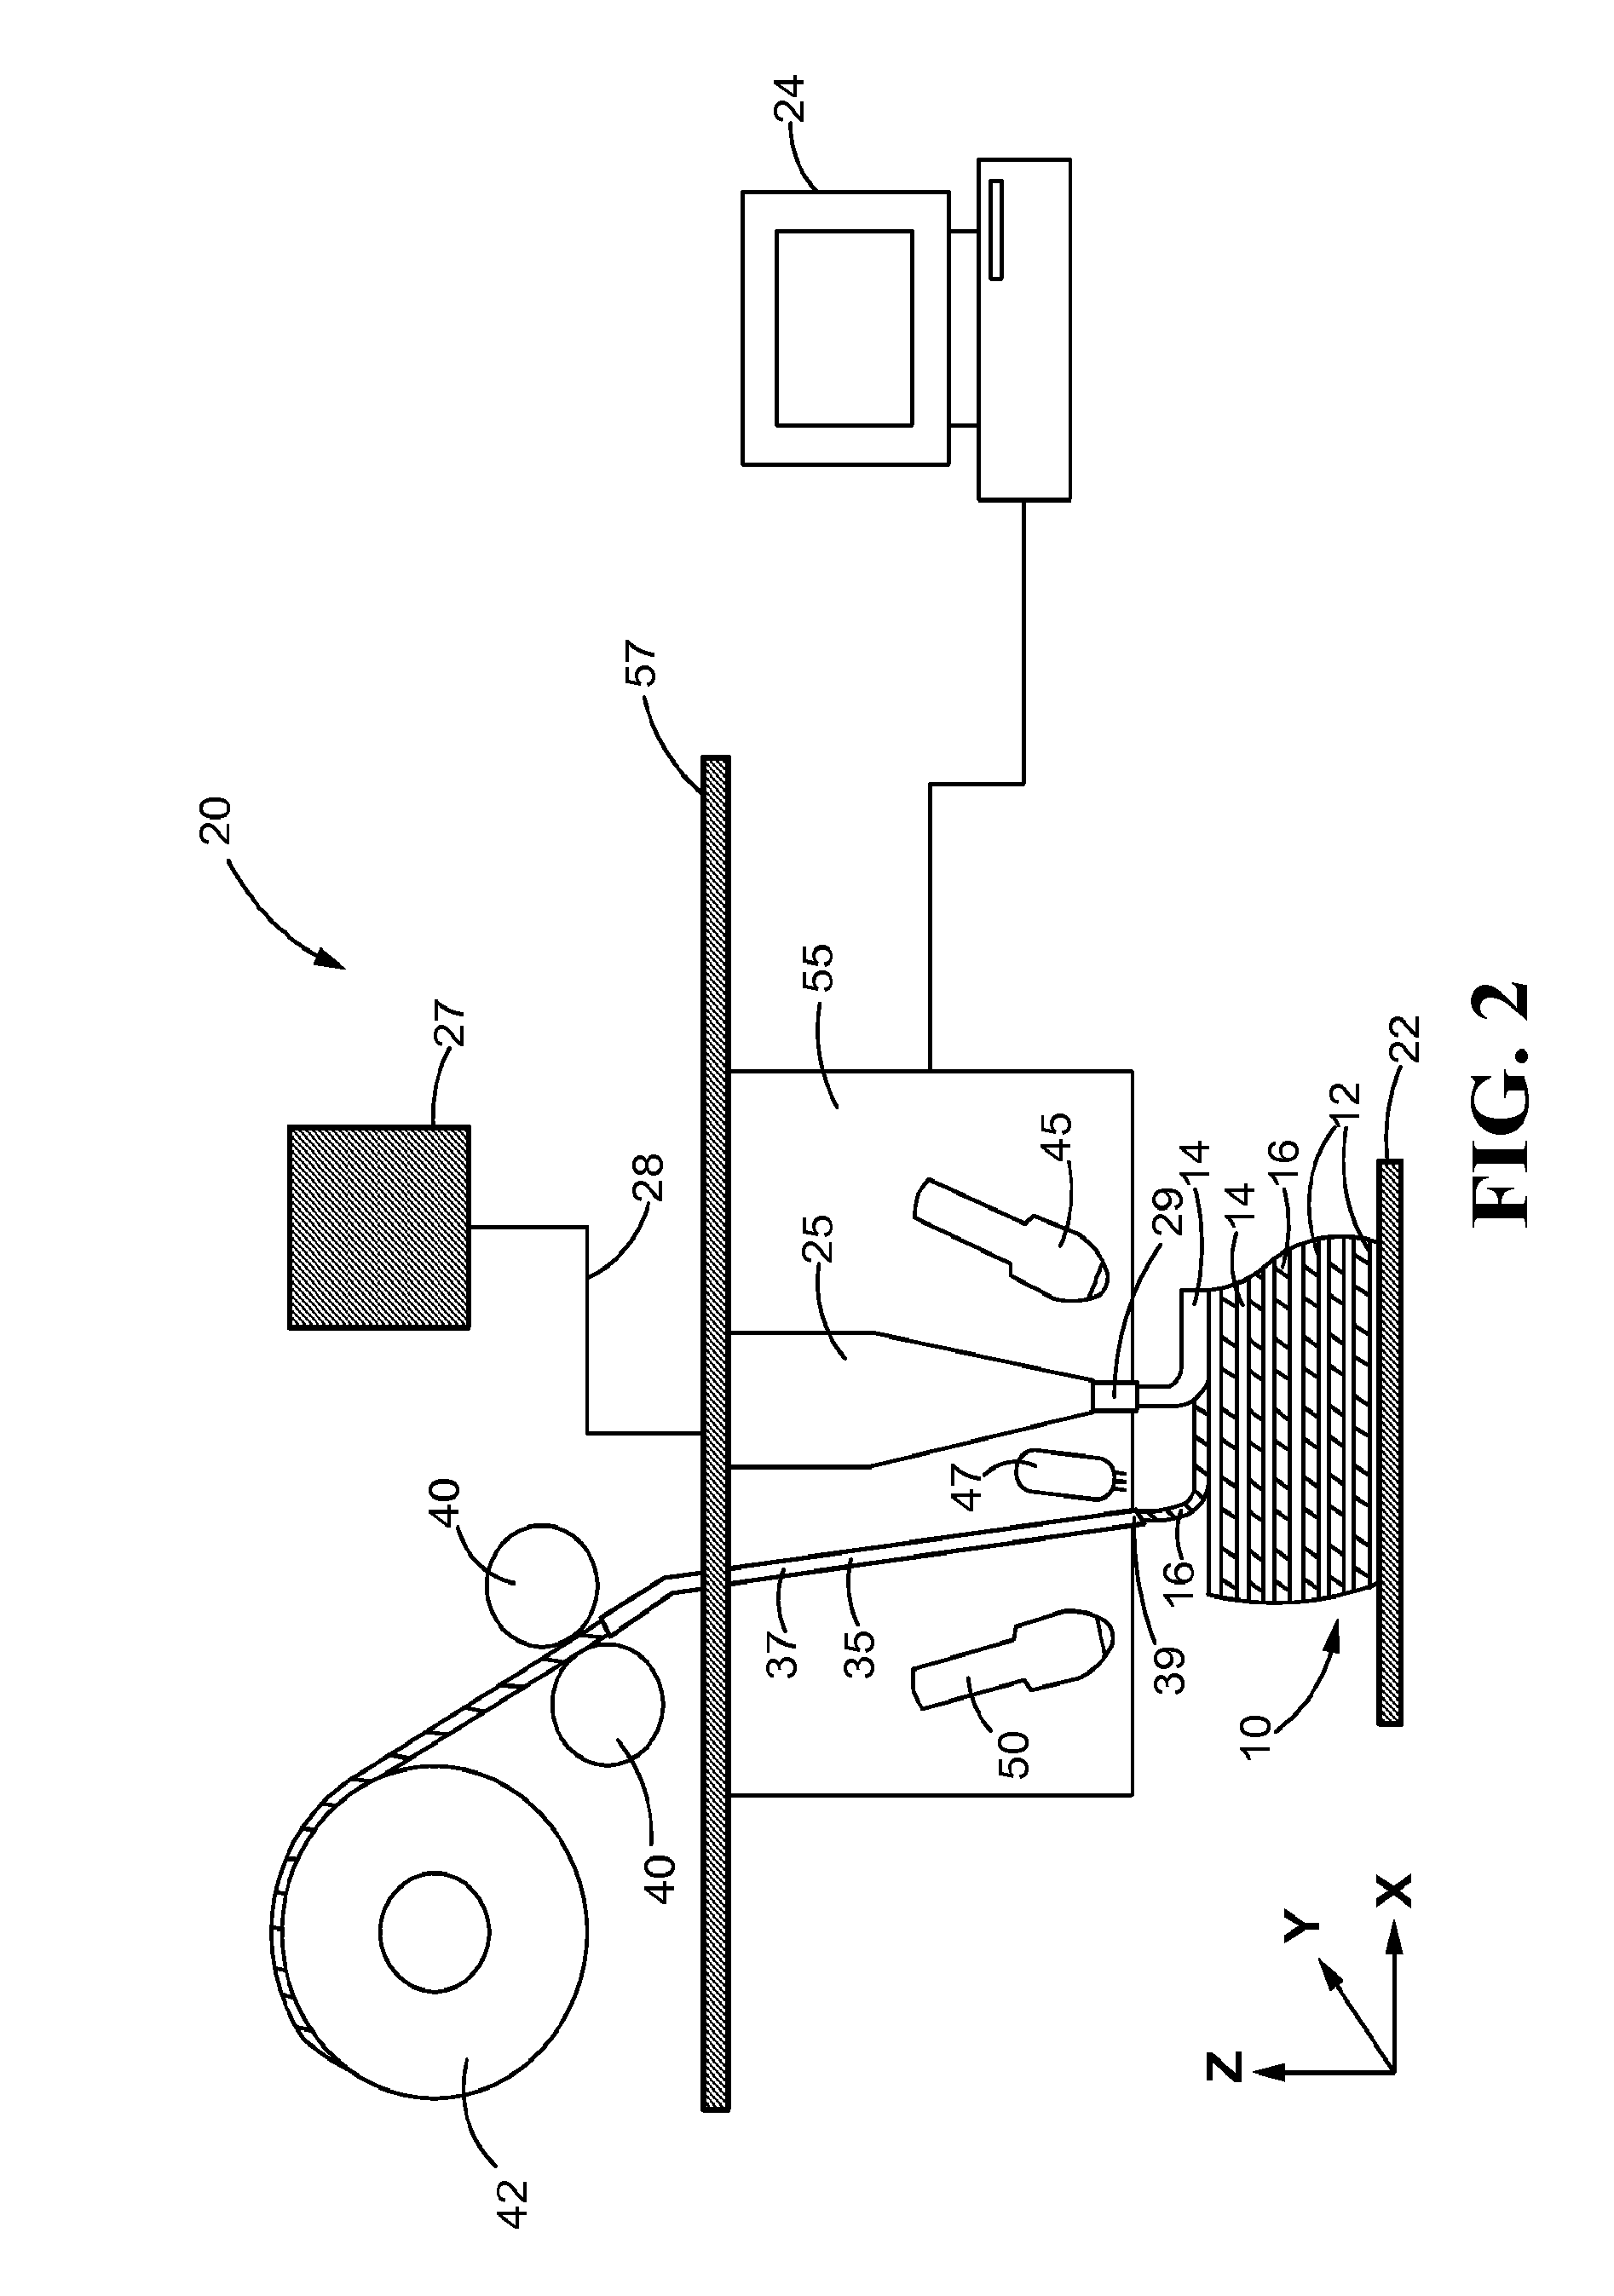 Continuous fiber-reinforced component fabrication